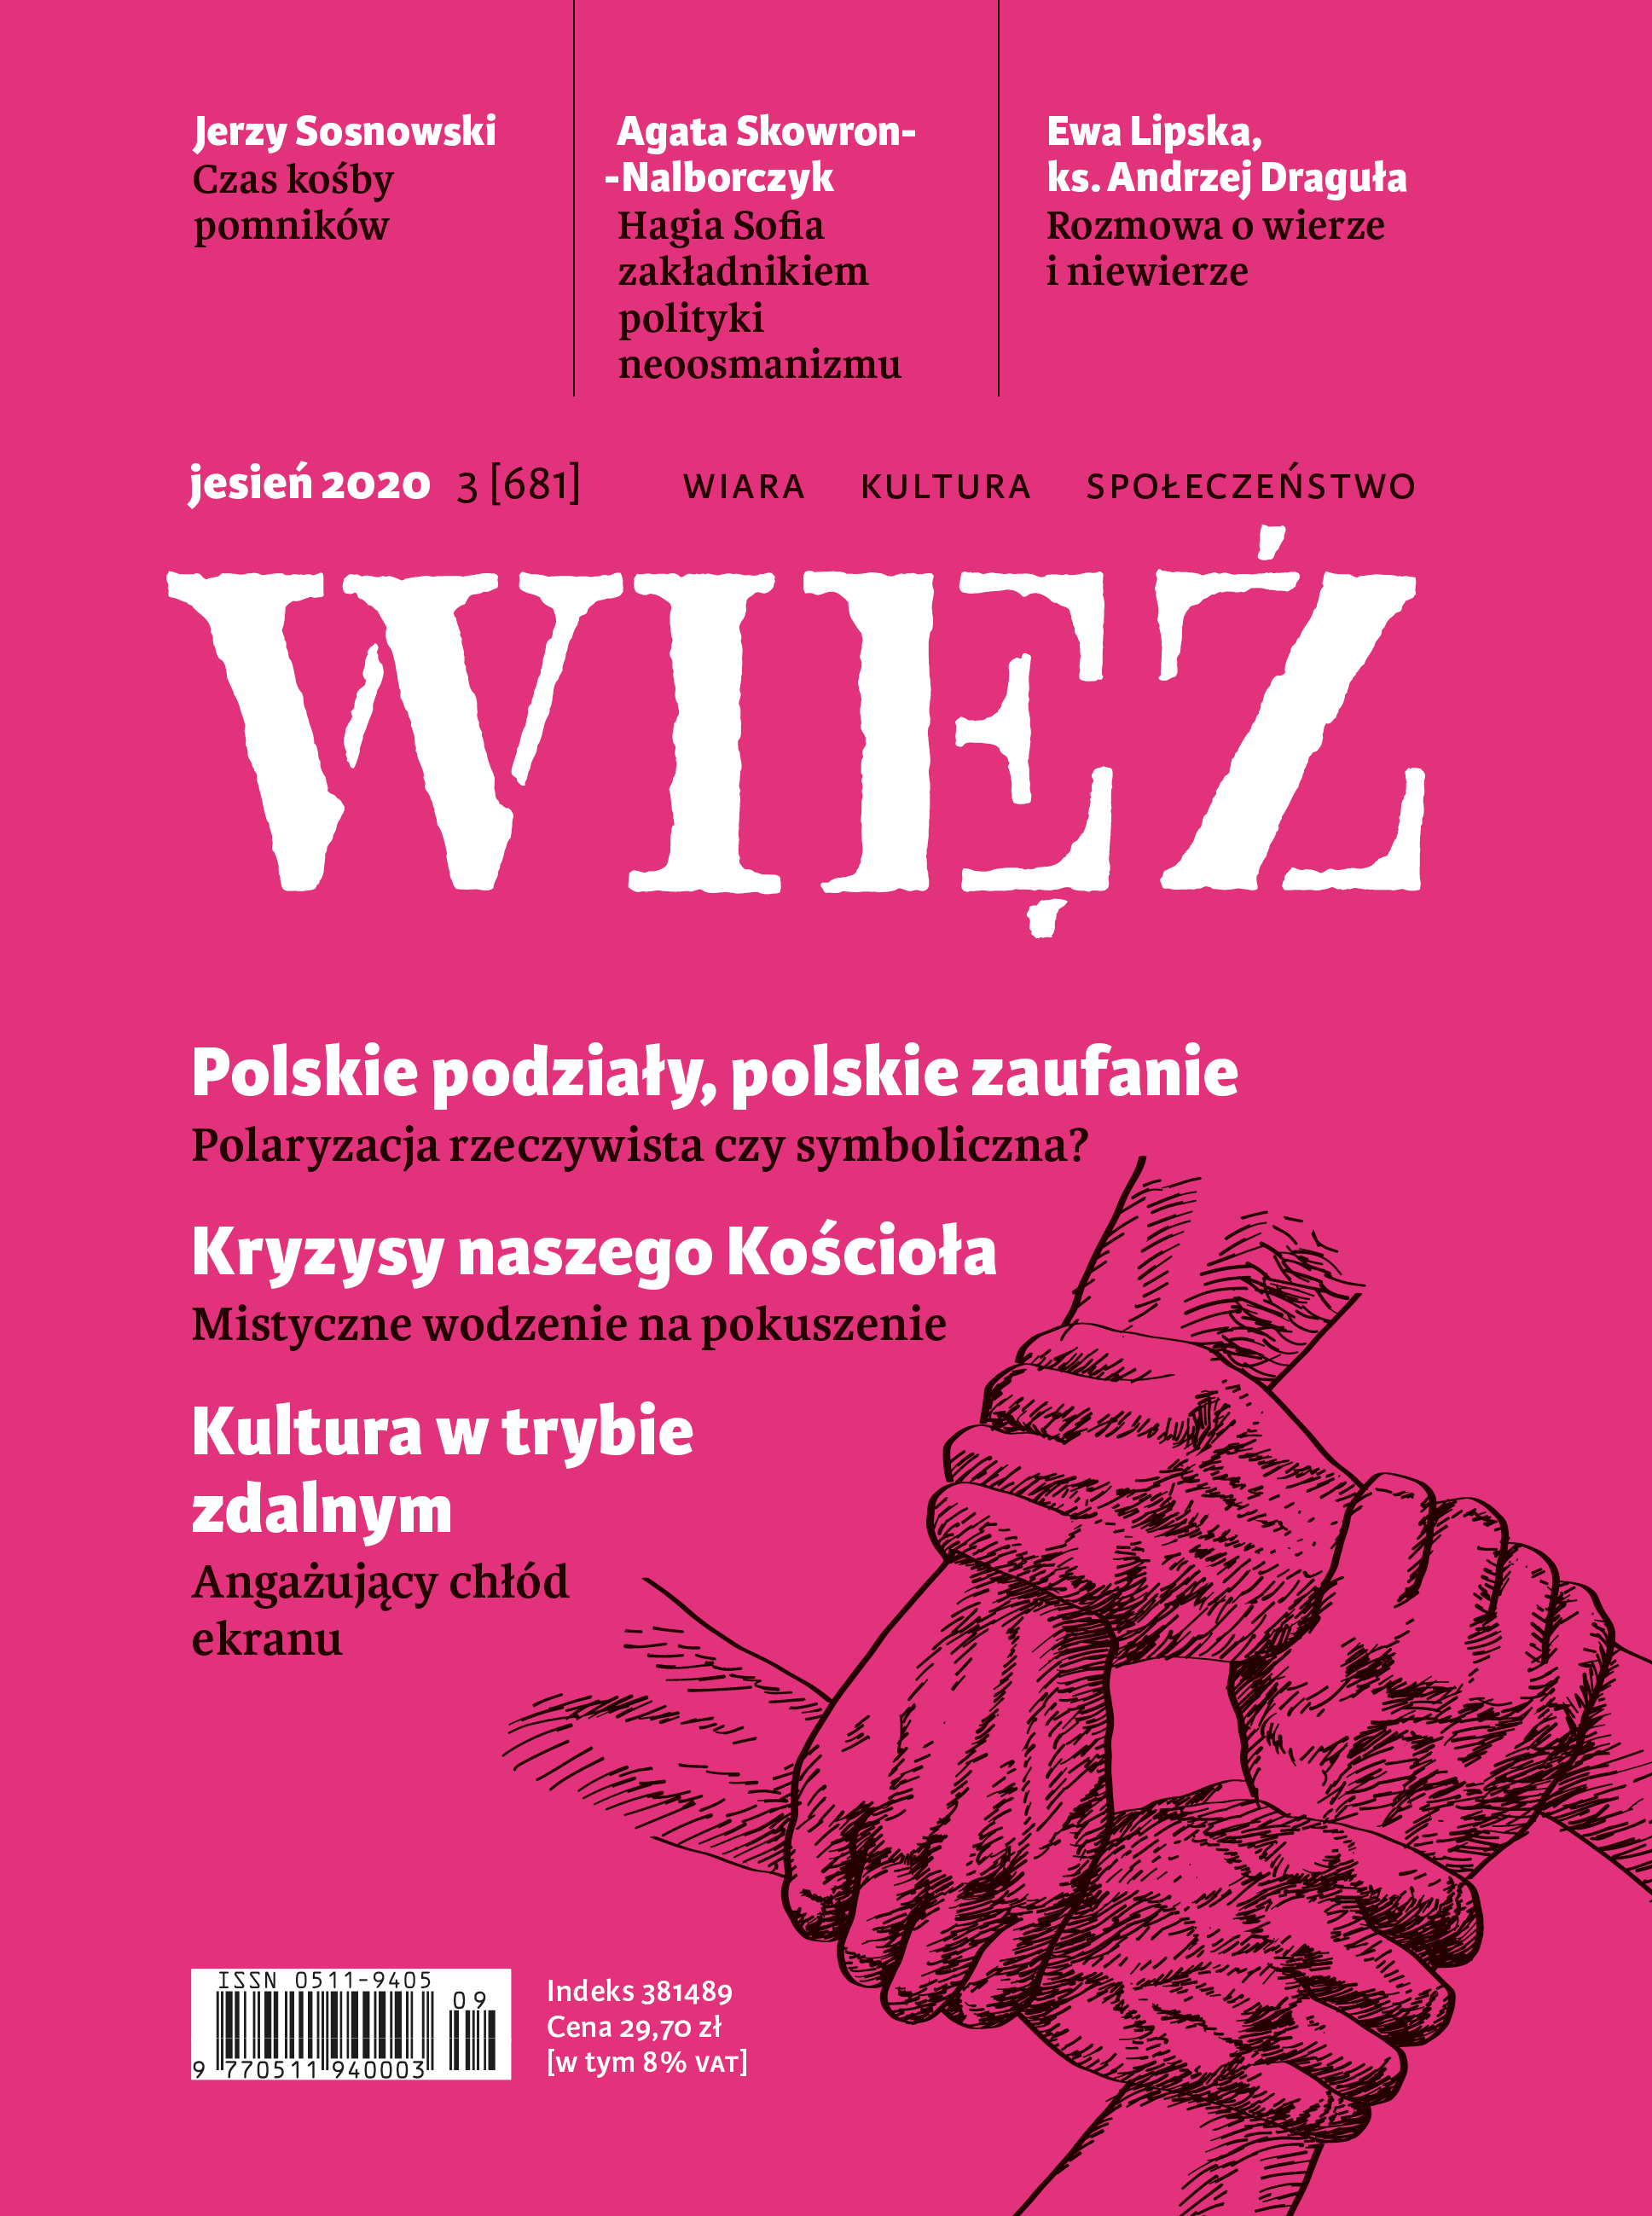 From the gallery of "Więz". Arkadiusz Gola Cover Image